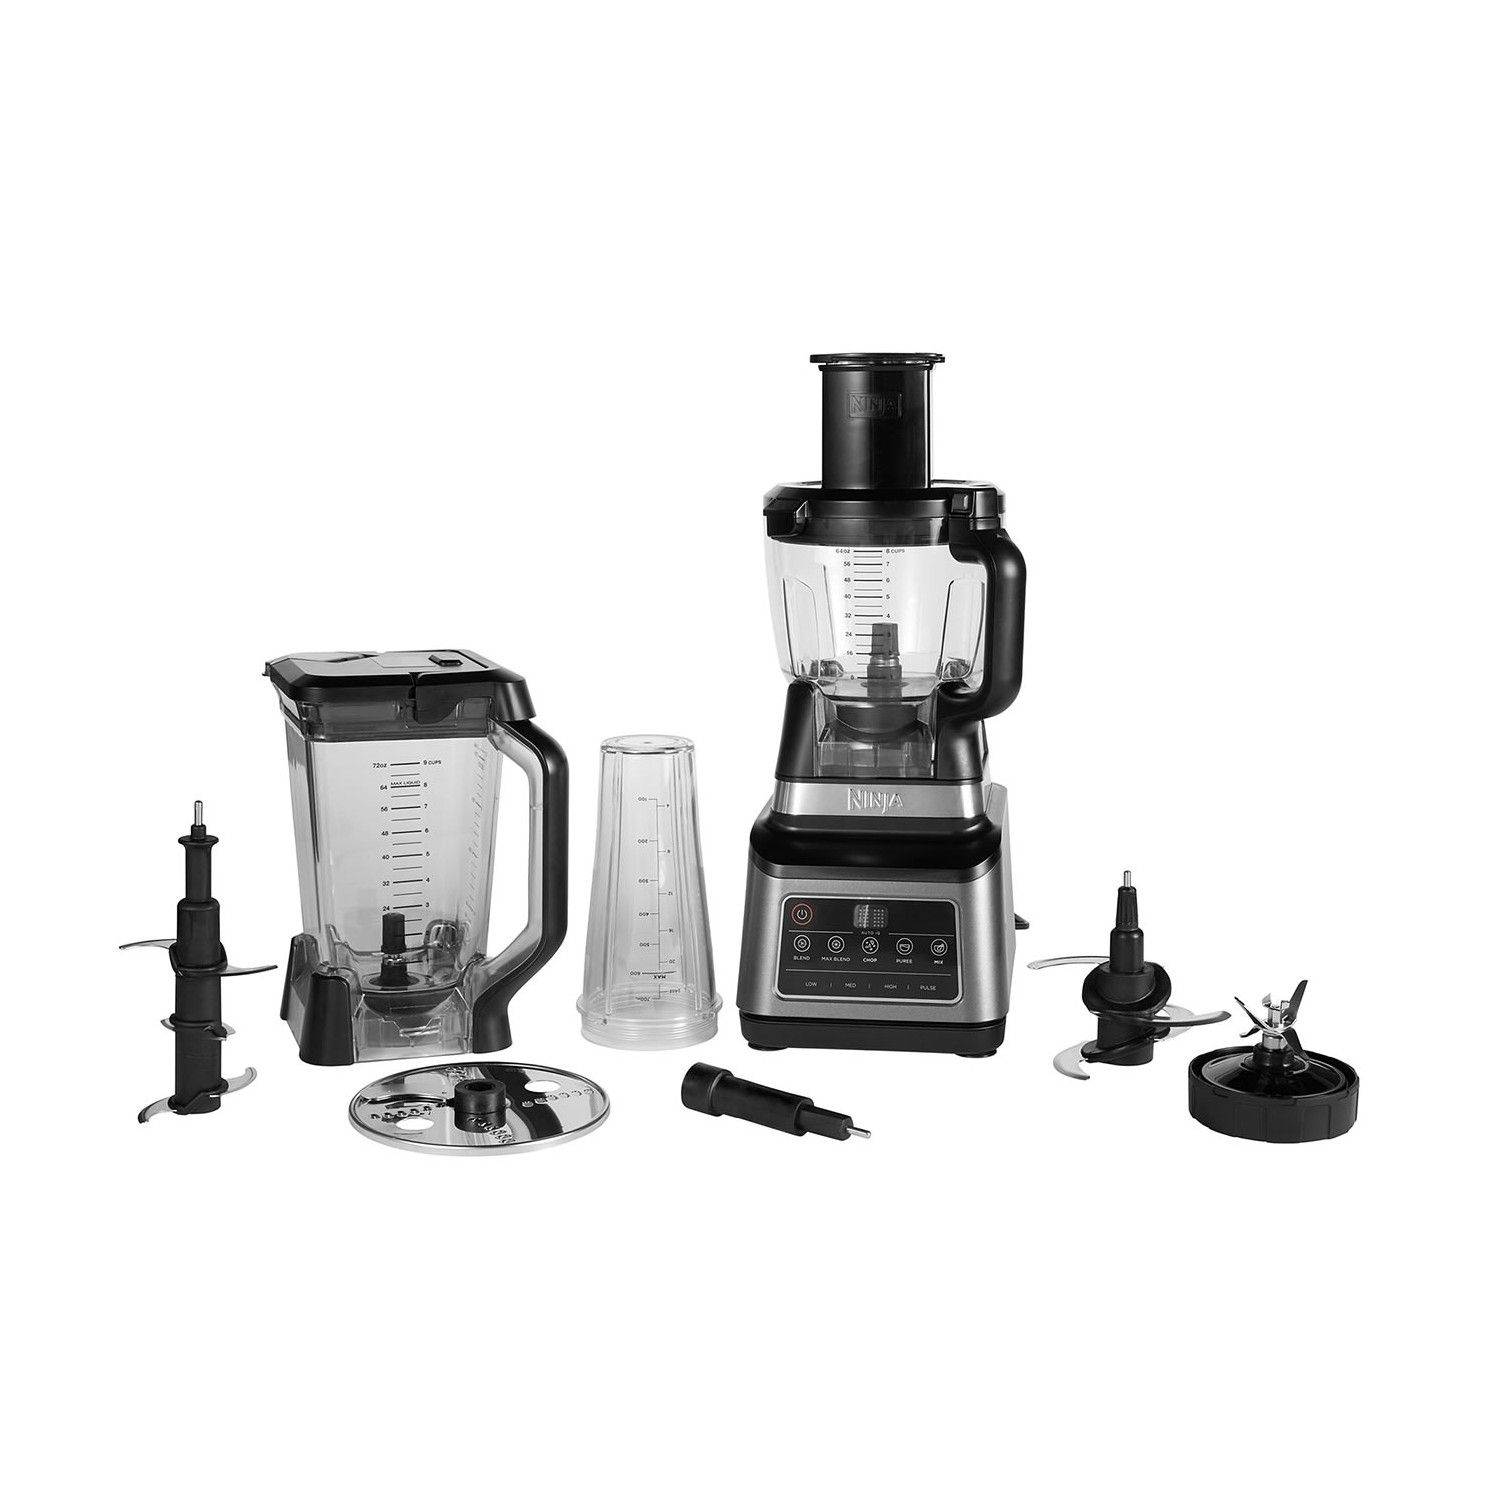 Ninja BN800UK 3-in-1 Blender and Food Processor with Auto IQ - Black/Silver - 1